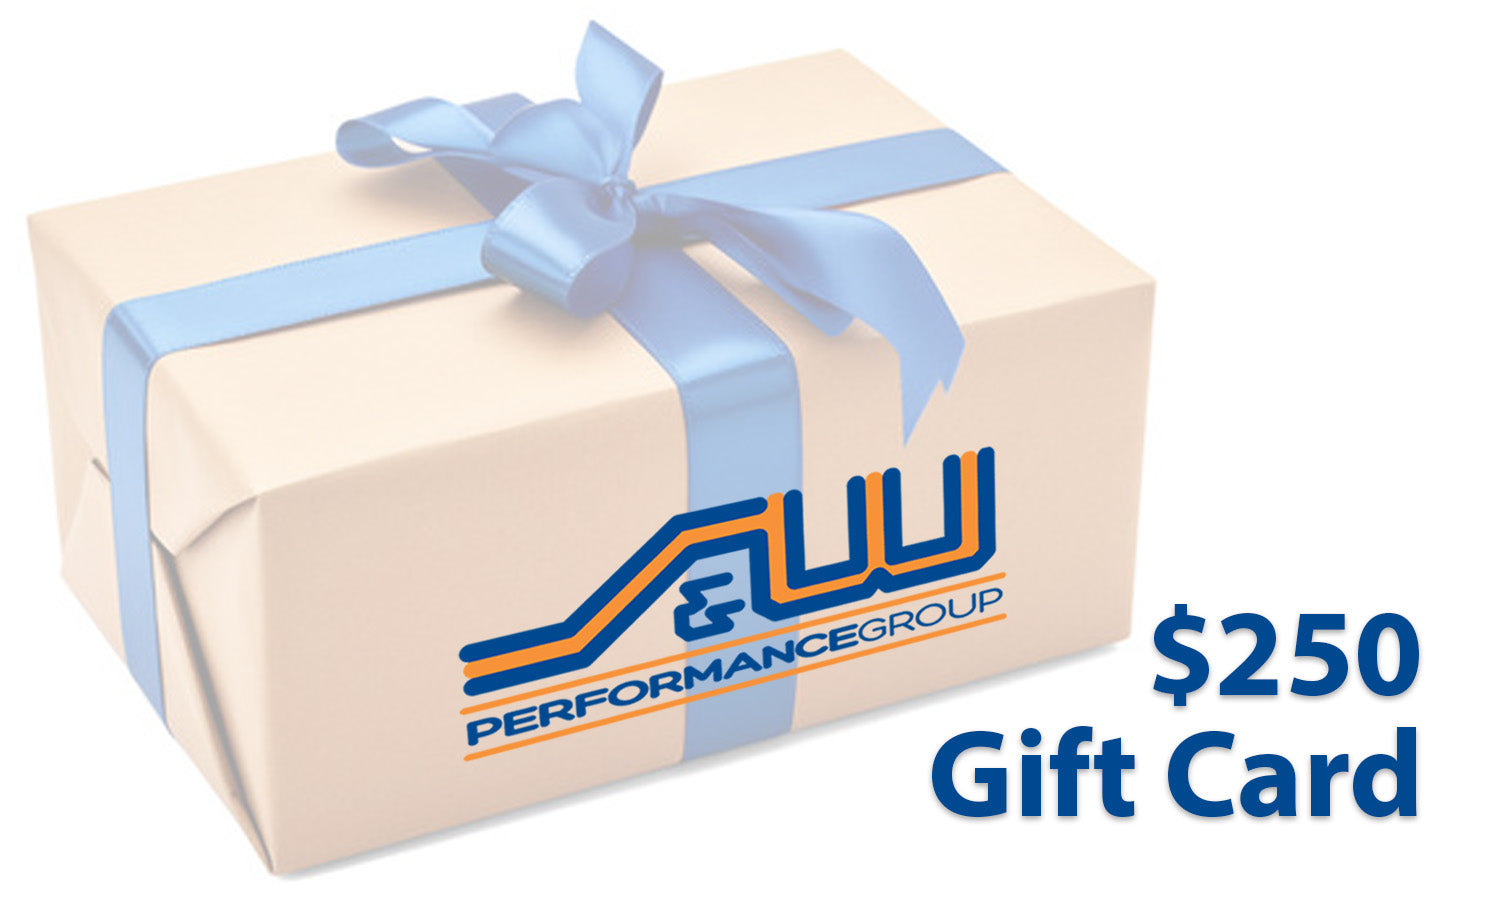 S&W Performance Group $250 Gift Card